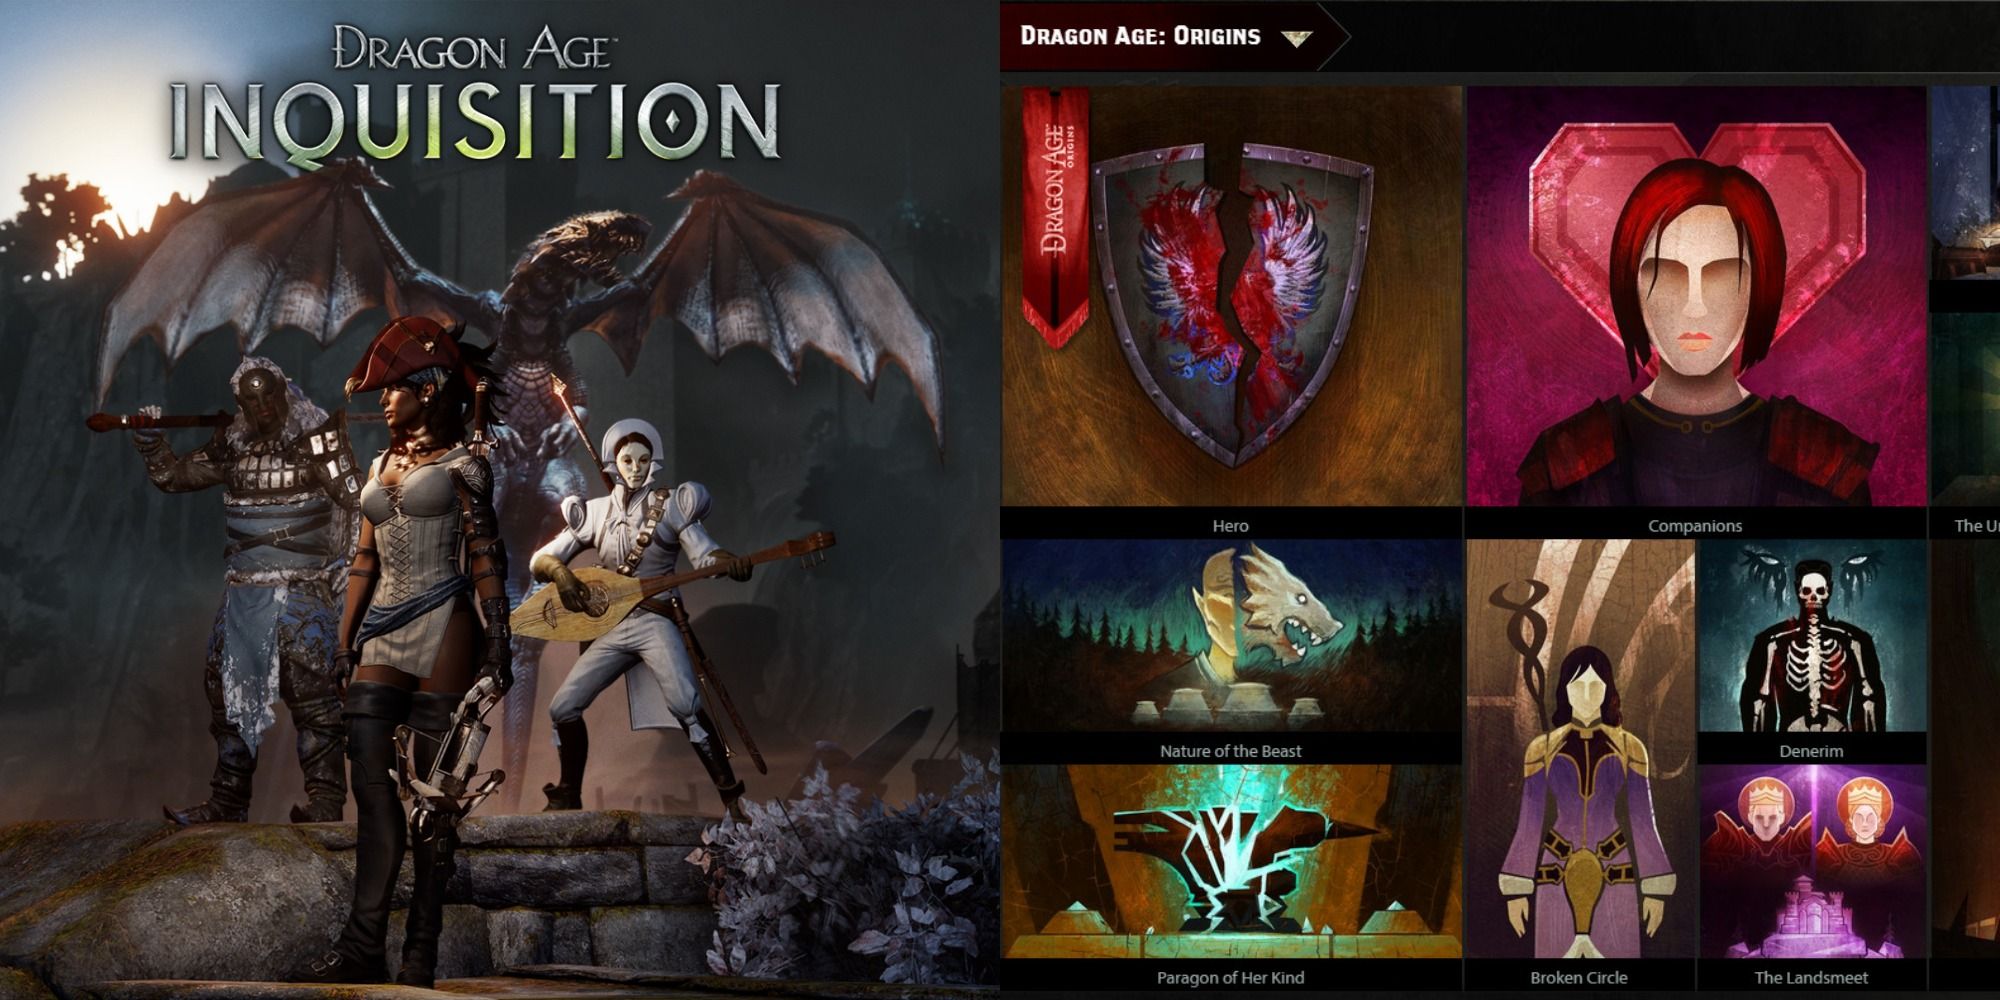 Should I play the first Dragon Age?